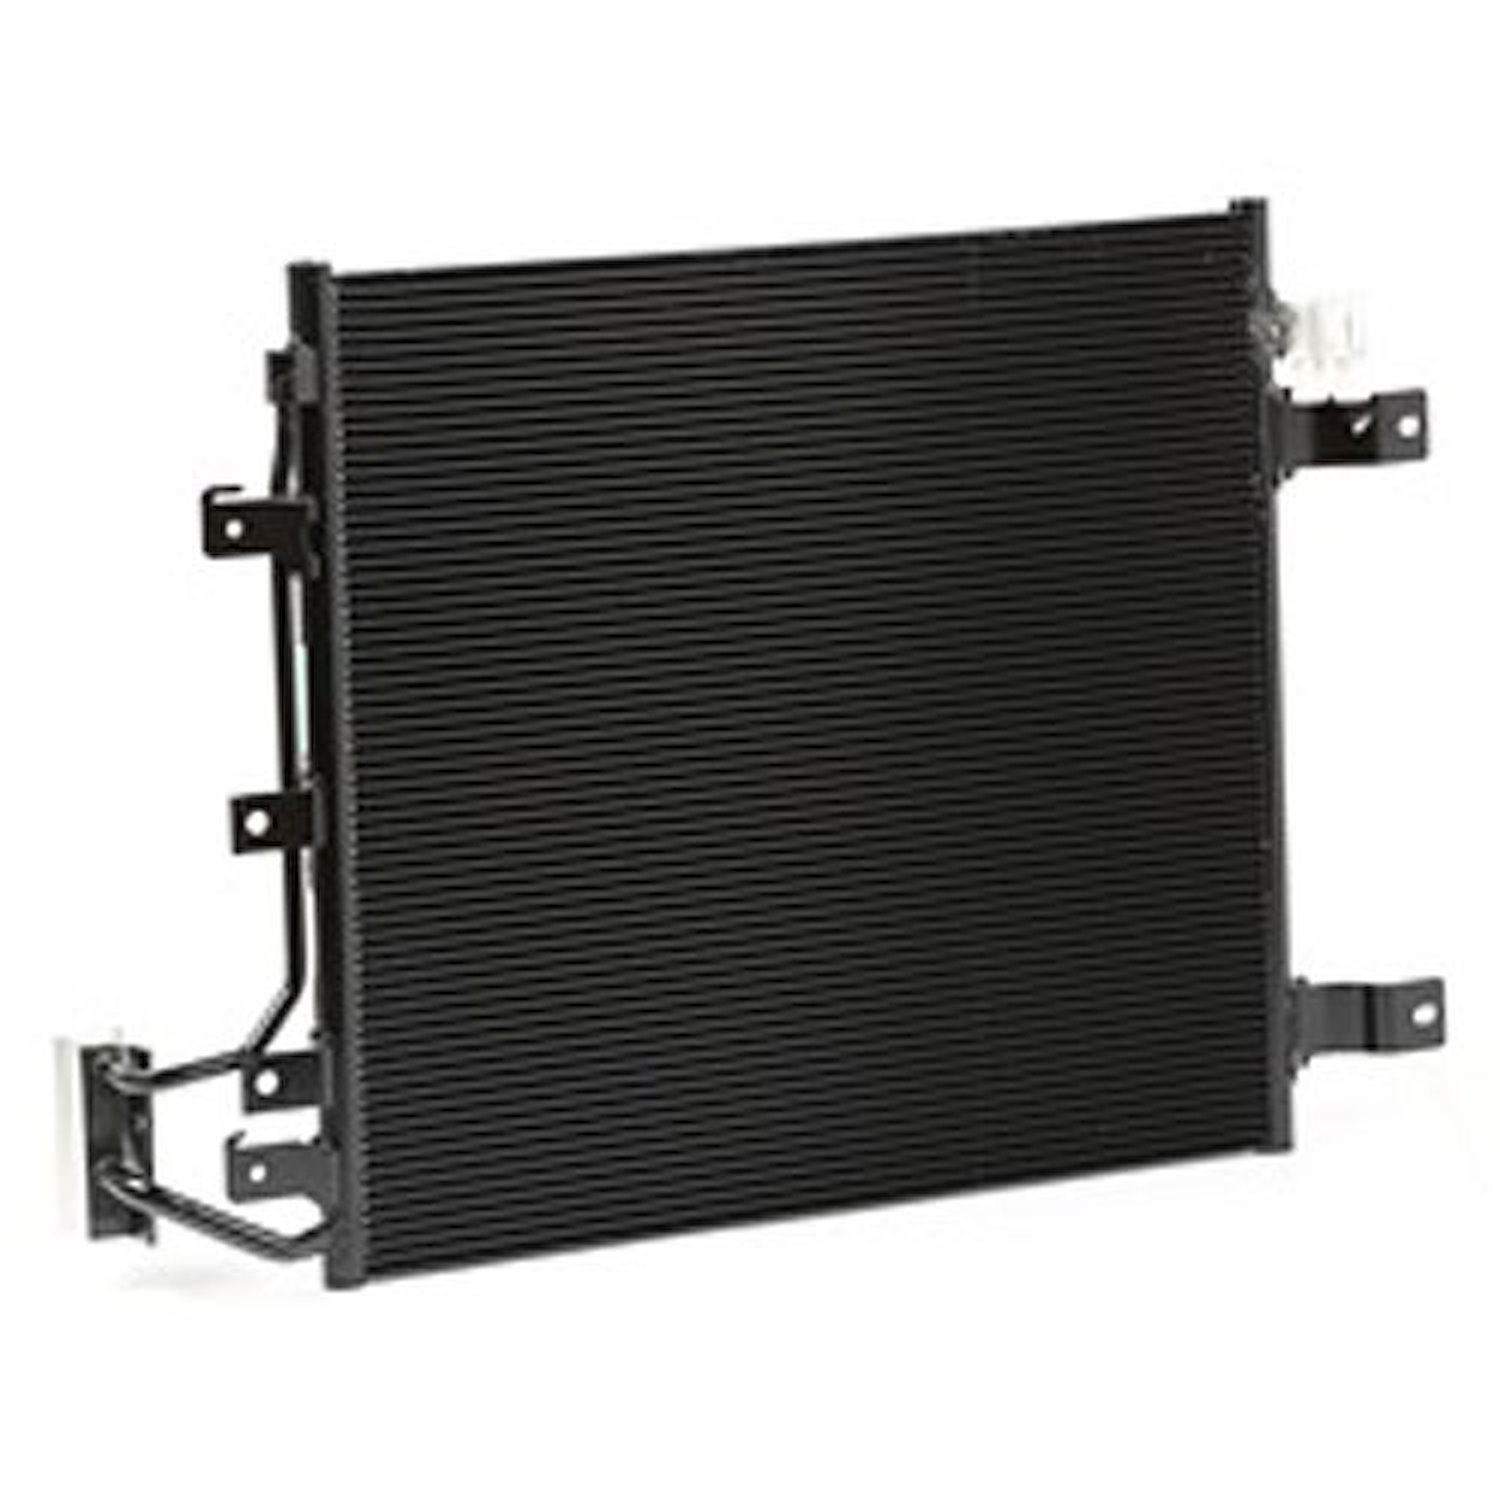 Replacement ac condenser from Omix-ADA, Fits 3.6L engines found in 12-16 Jeep Wrangler models